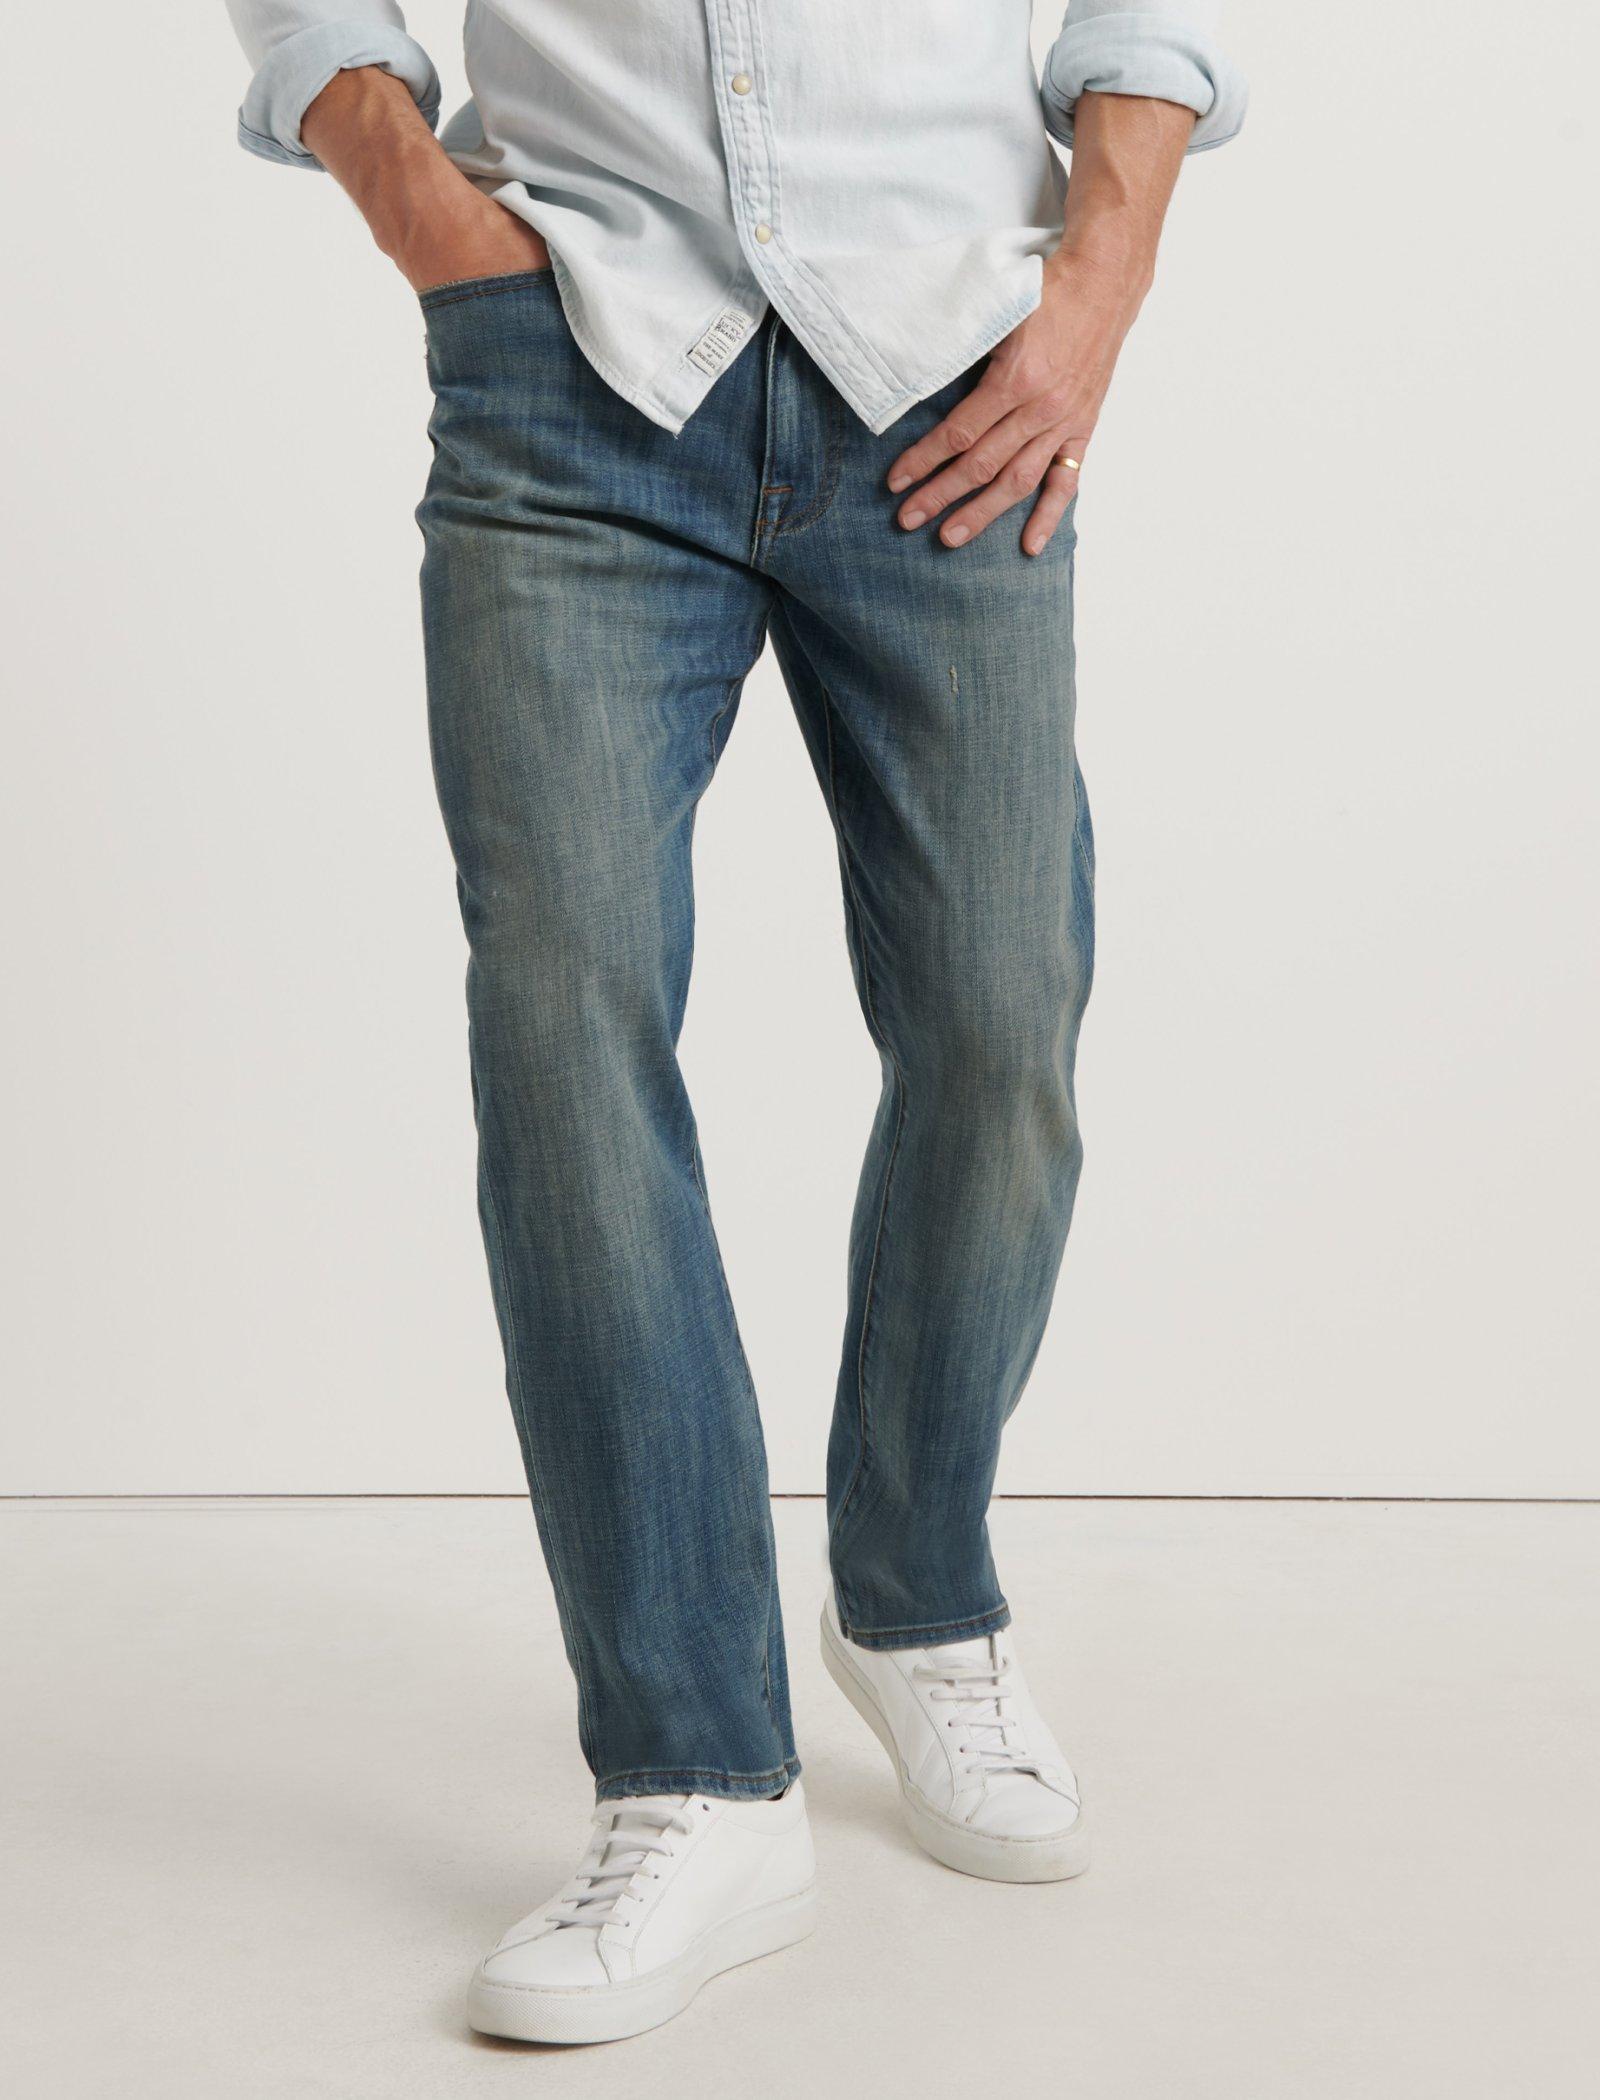 lucky brand 410 athletic slim jeans